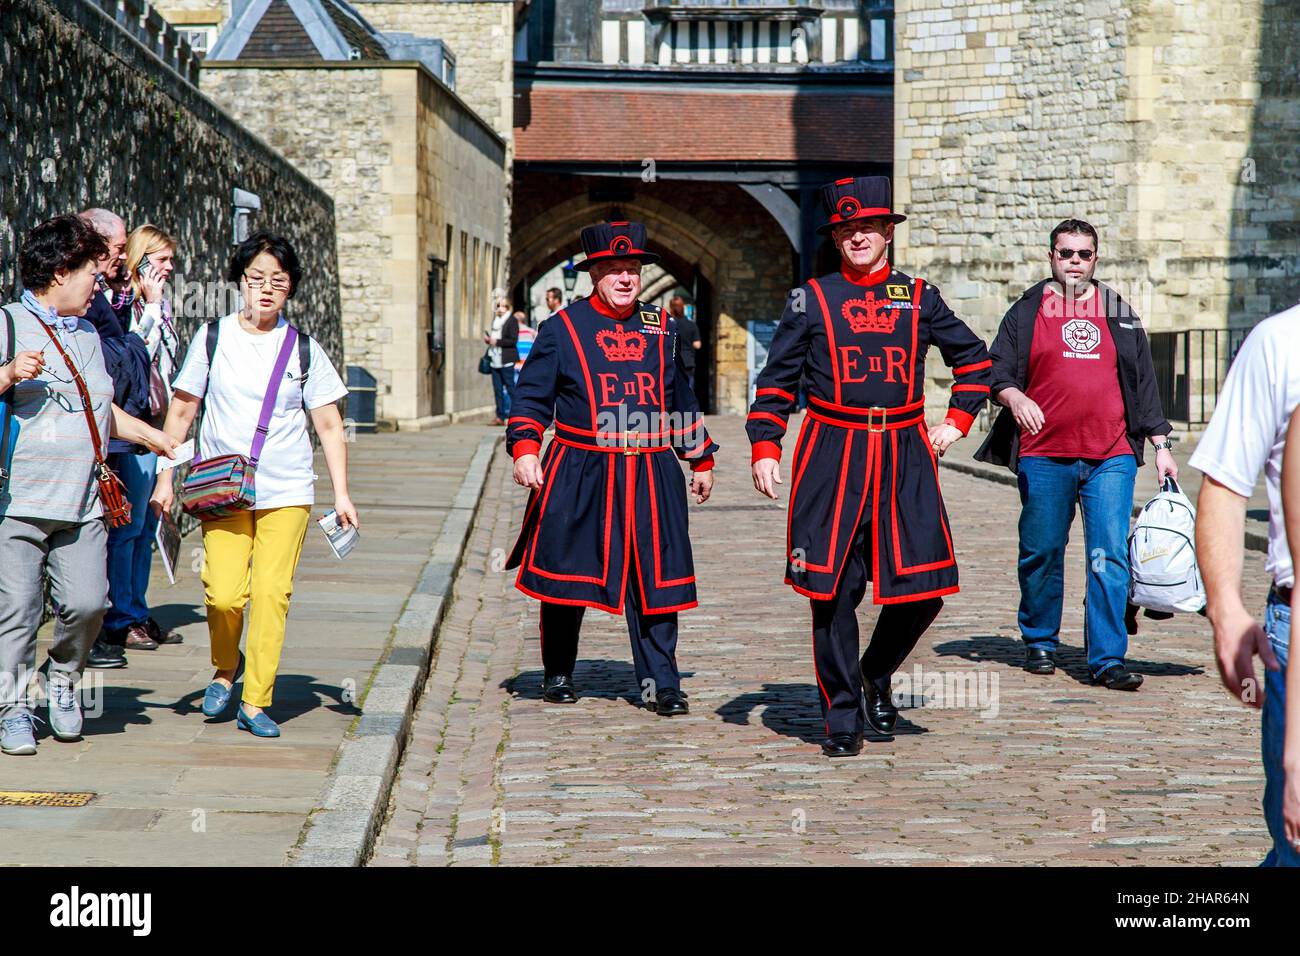 LONDON, GREAT BRITAIN - MAY 16, 2014: These are ceremonial guards (beefeaters) in everyday uniform among visitors to the Tower of London. Stock Photo